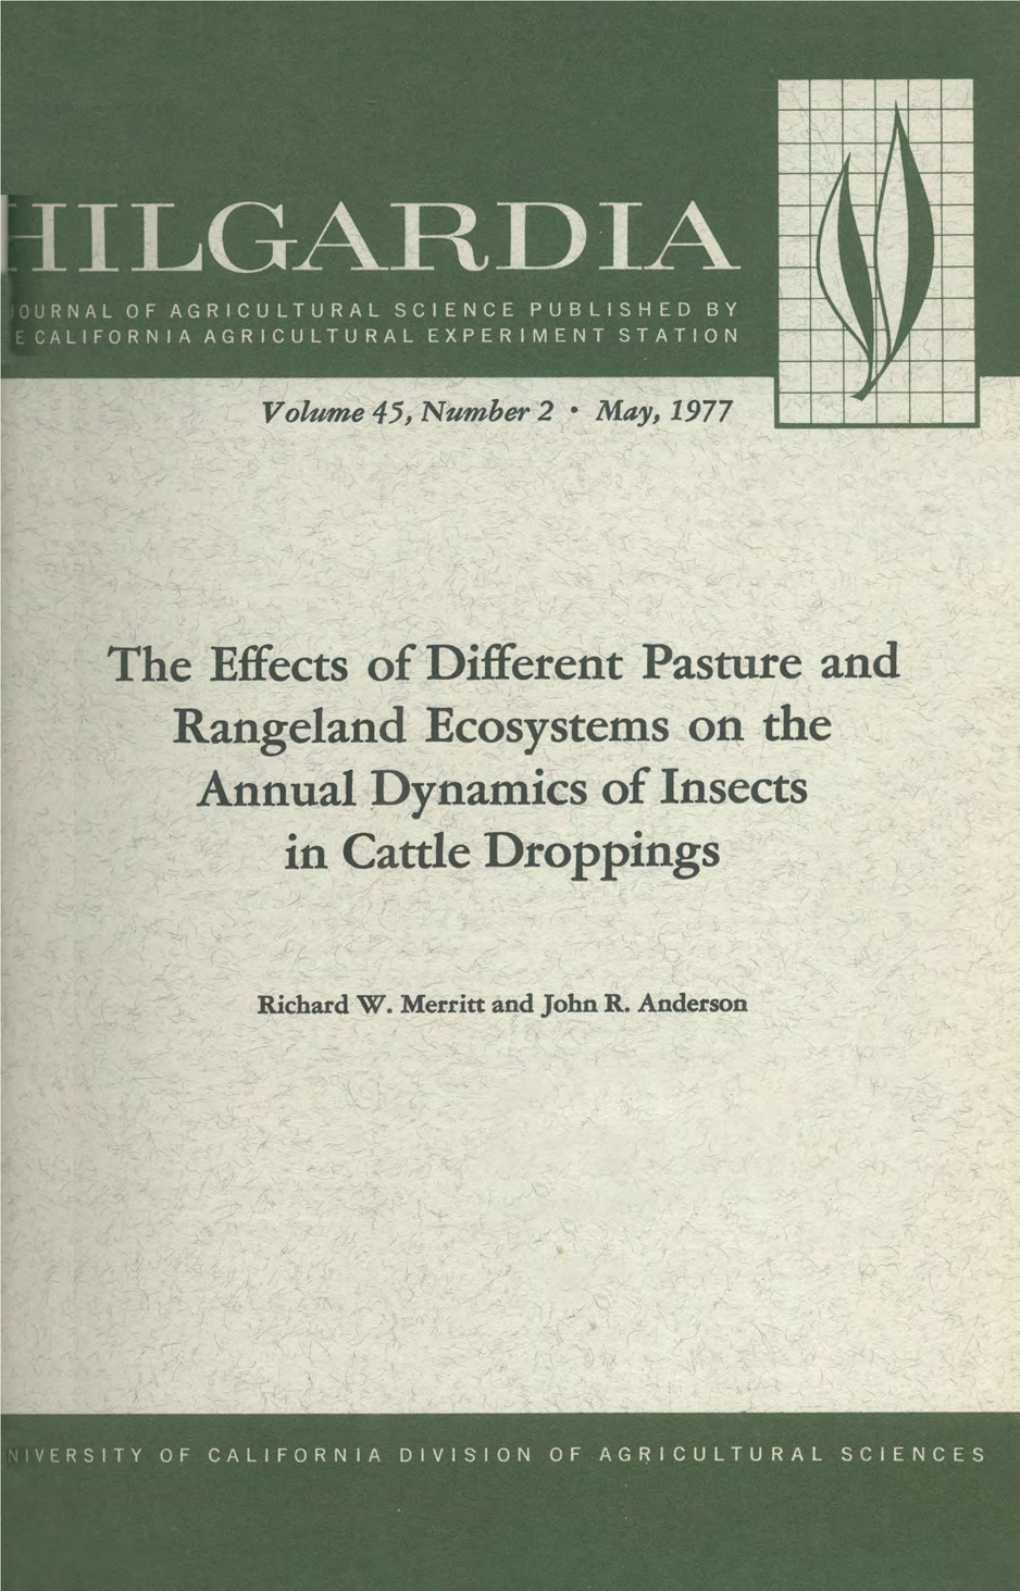 The Effects of Different Pasture and Rangeland Ecosystems on the Annual Dynamics of Insects in Cattle Droppings1